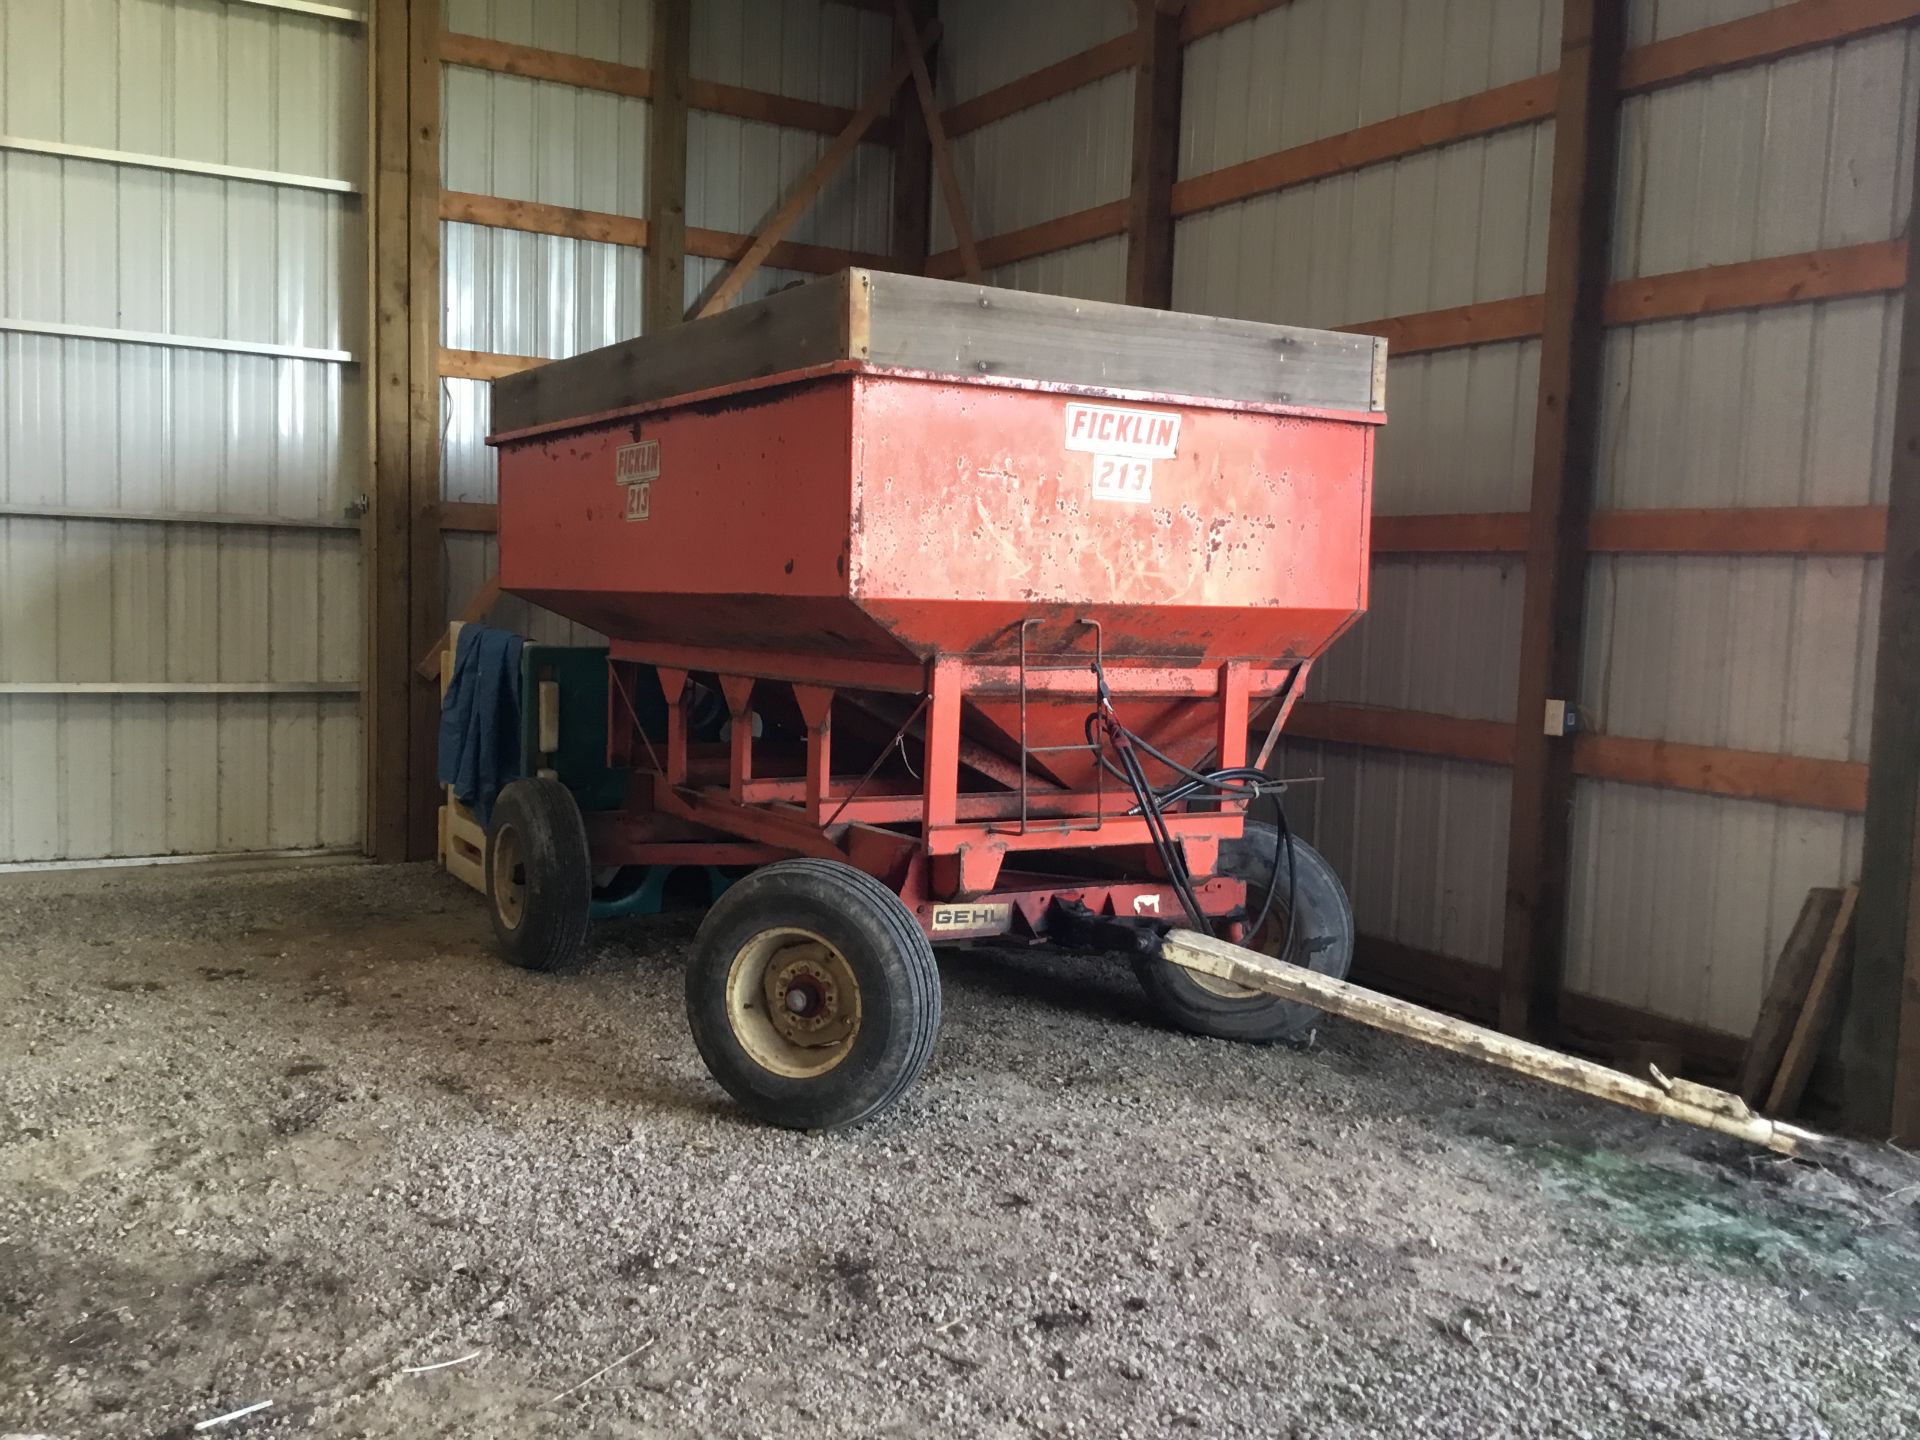 Ficklin 213 Gravity Seed Wagon, W/Gehl 8 Ton Gear, Hyd. Drive Seed Brush Auger - Image 2 of 3